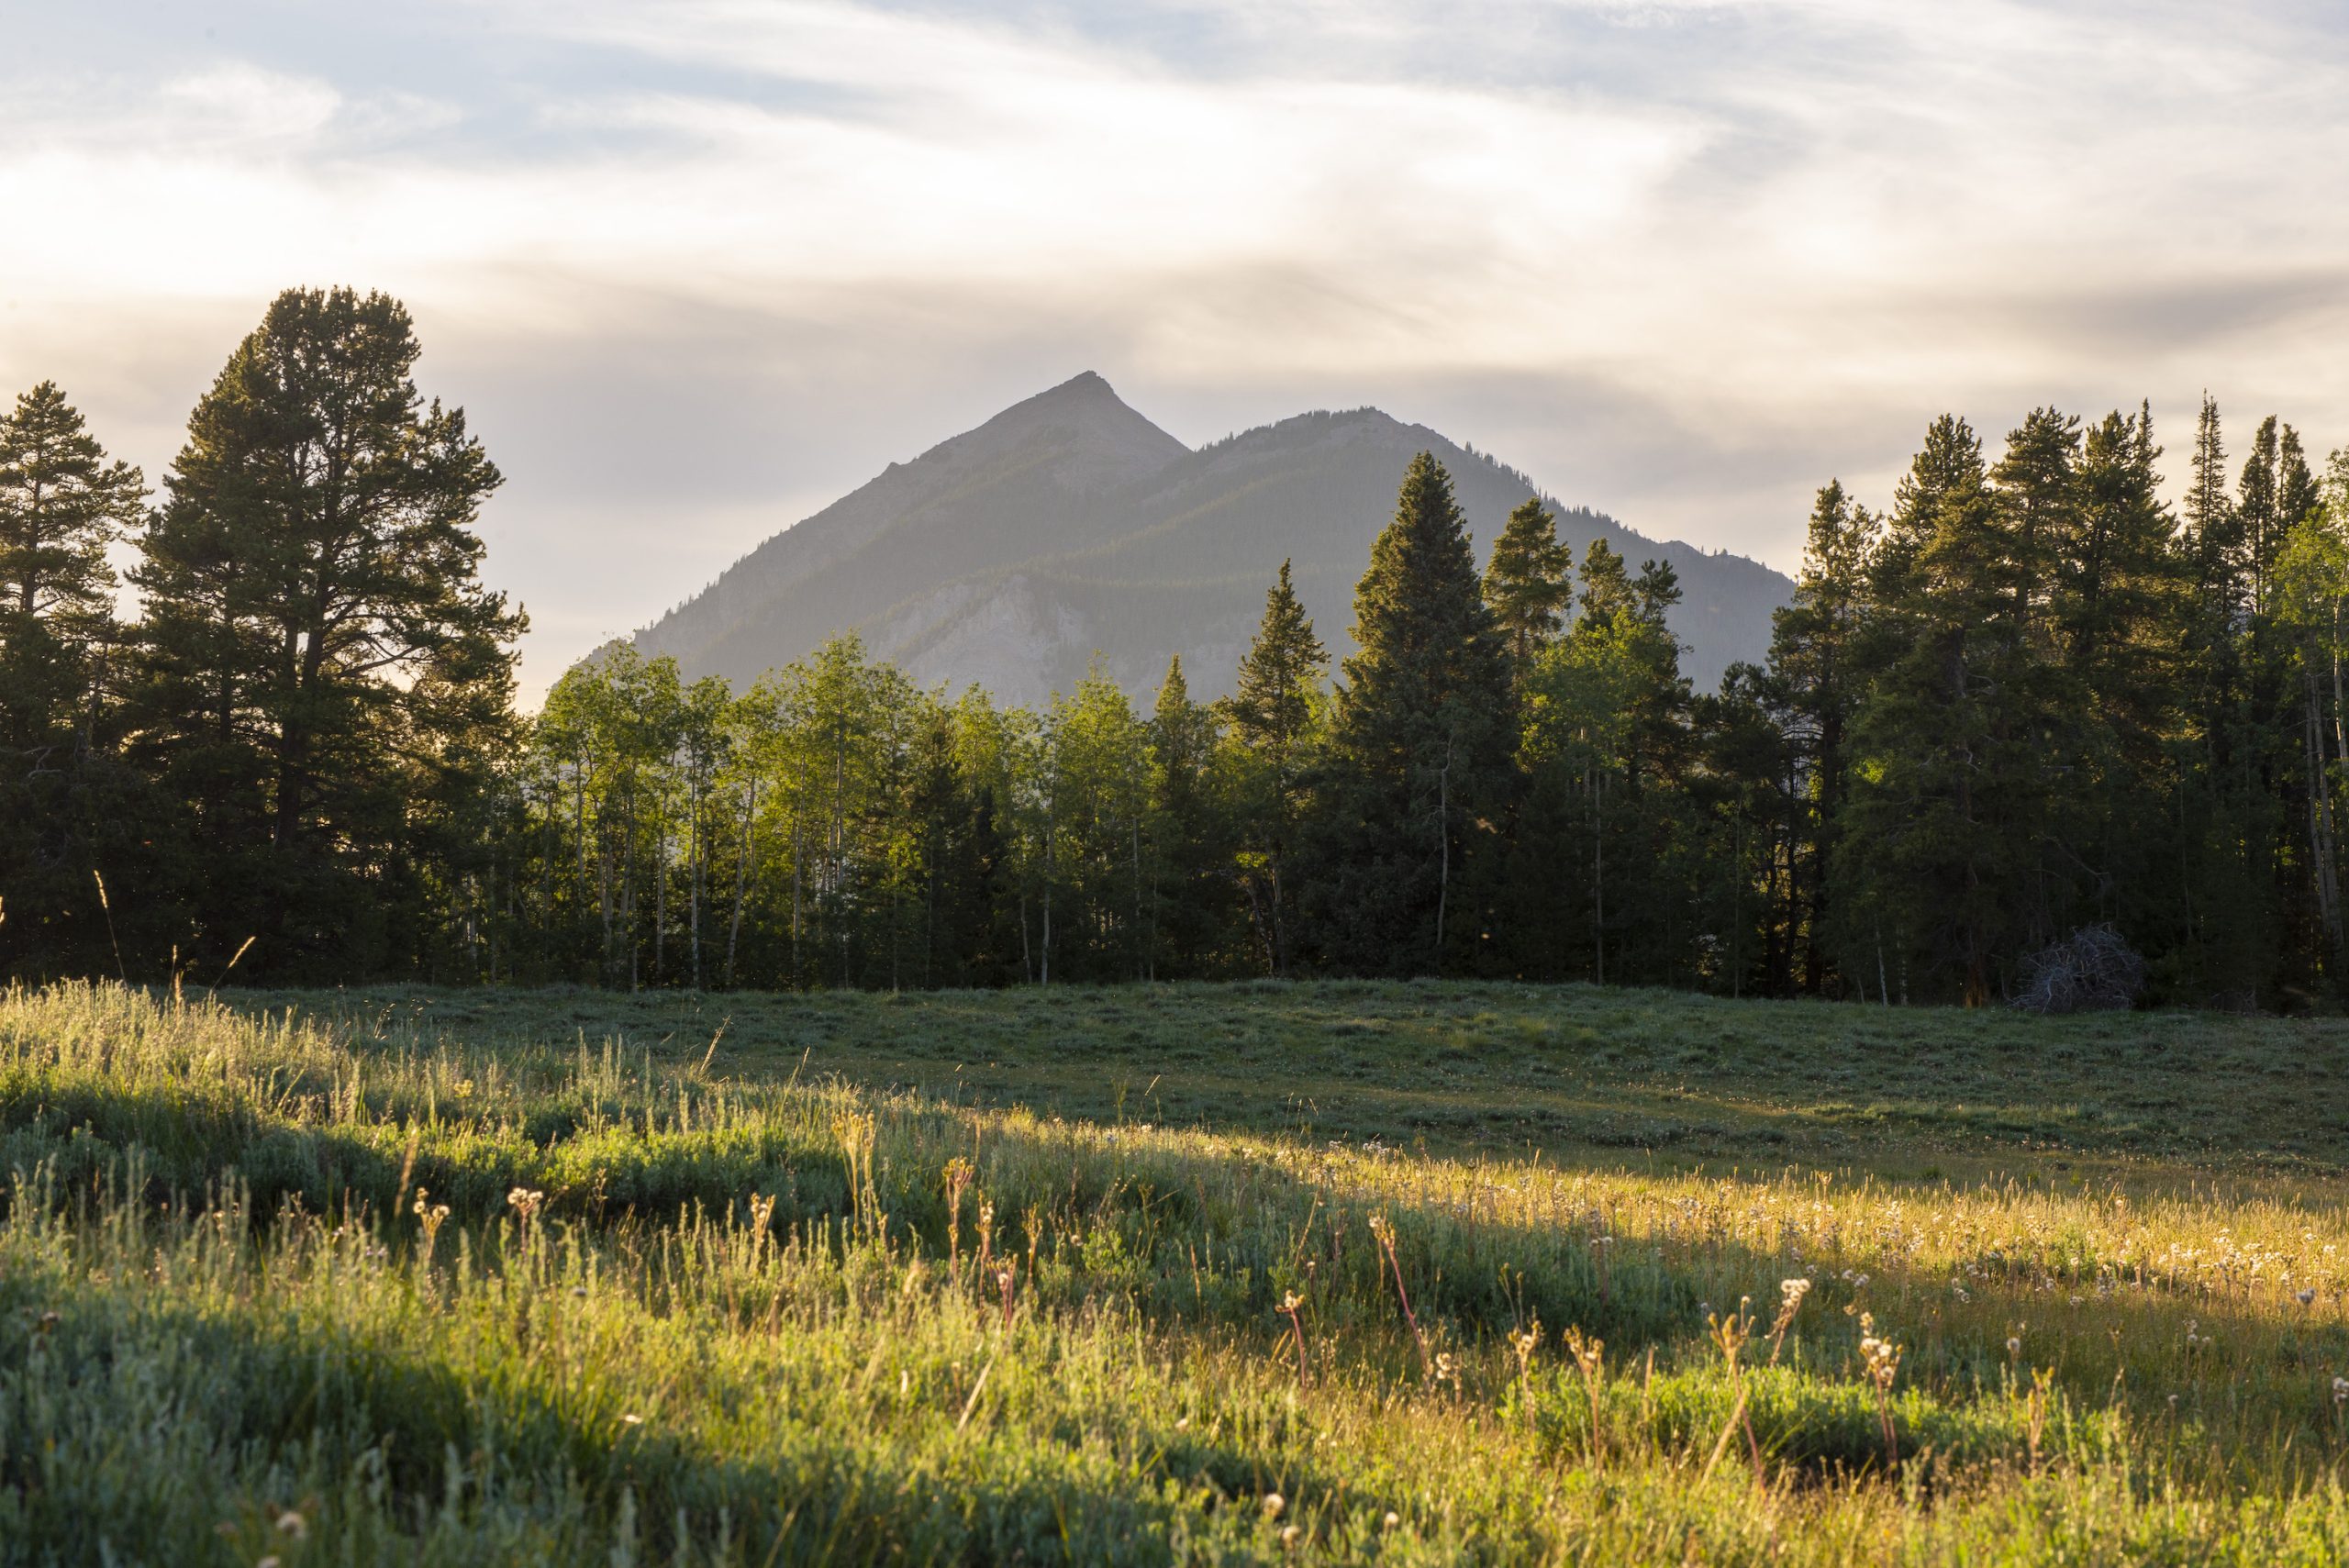 A pointy mountain peak covered in haze from the sunset with trees and a grassy field in the foreground. This sunset is happening over Crested Butte, Colorado